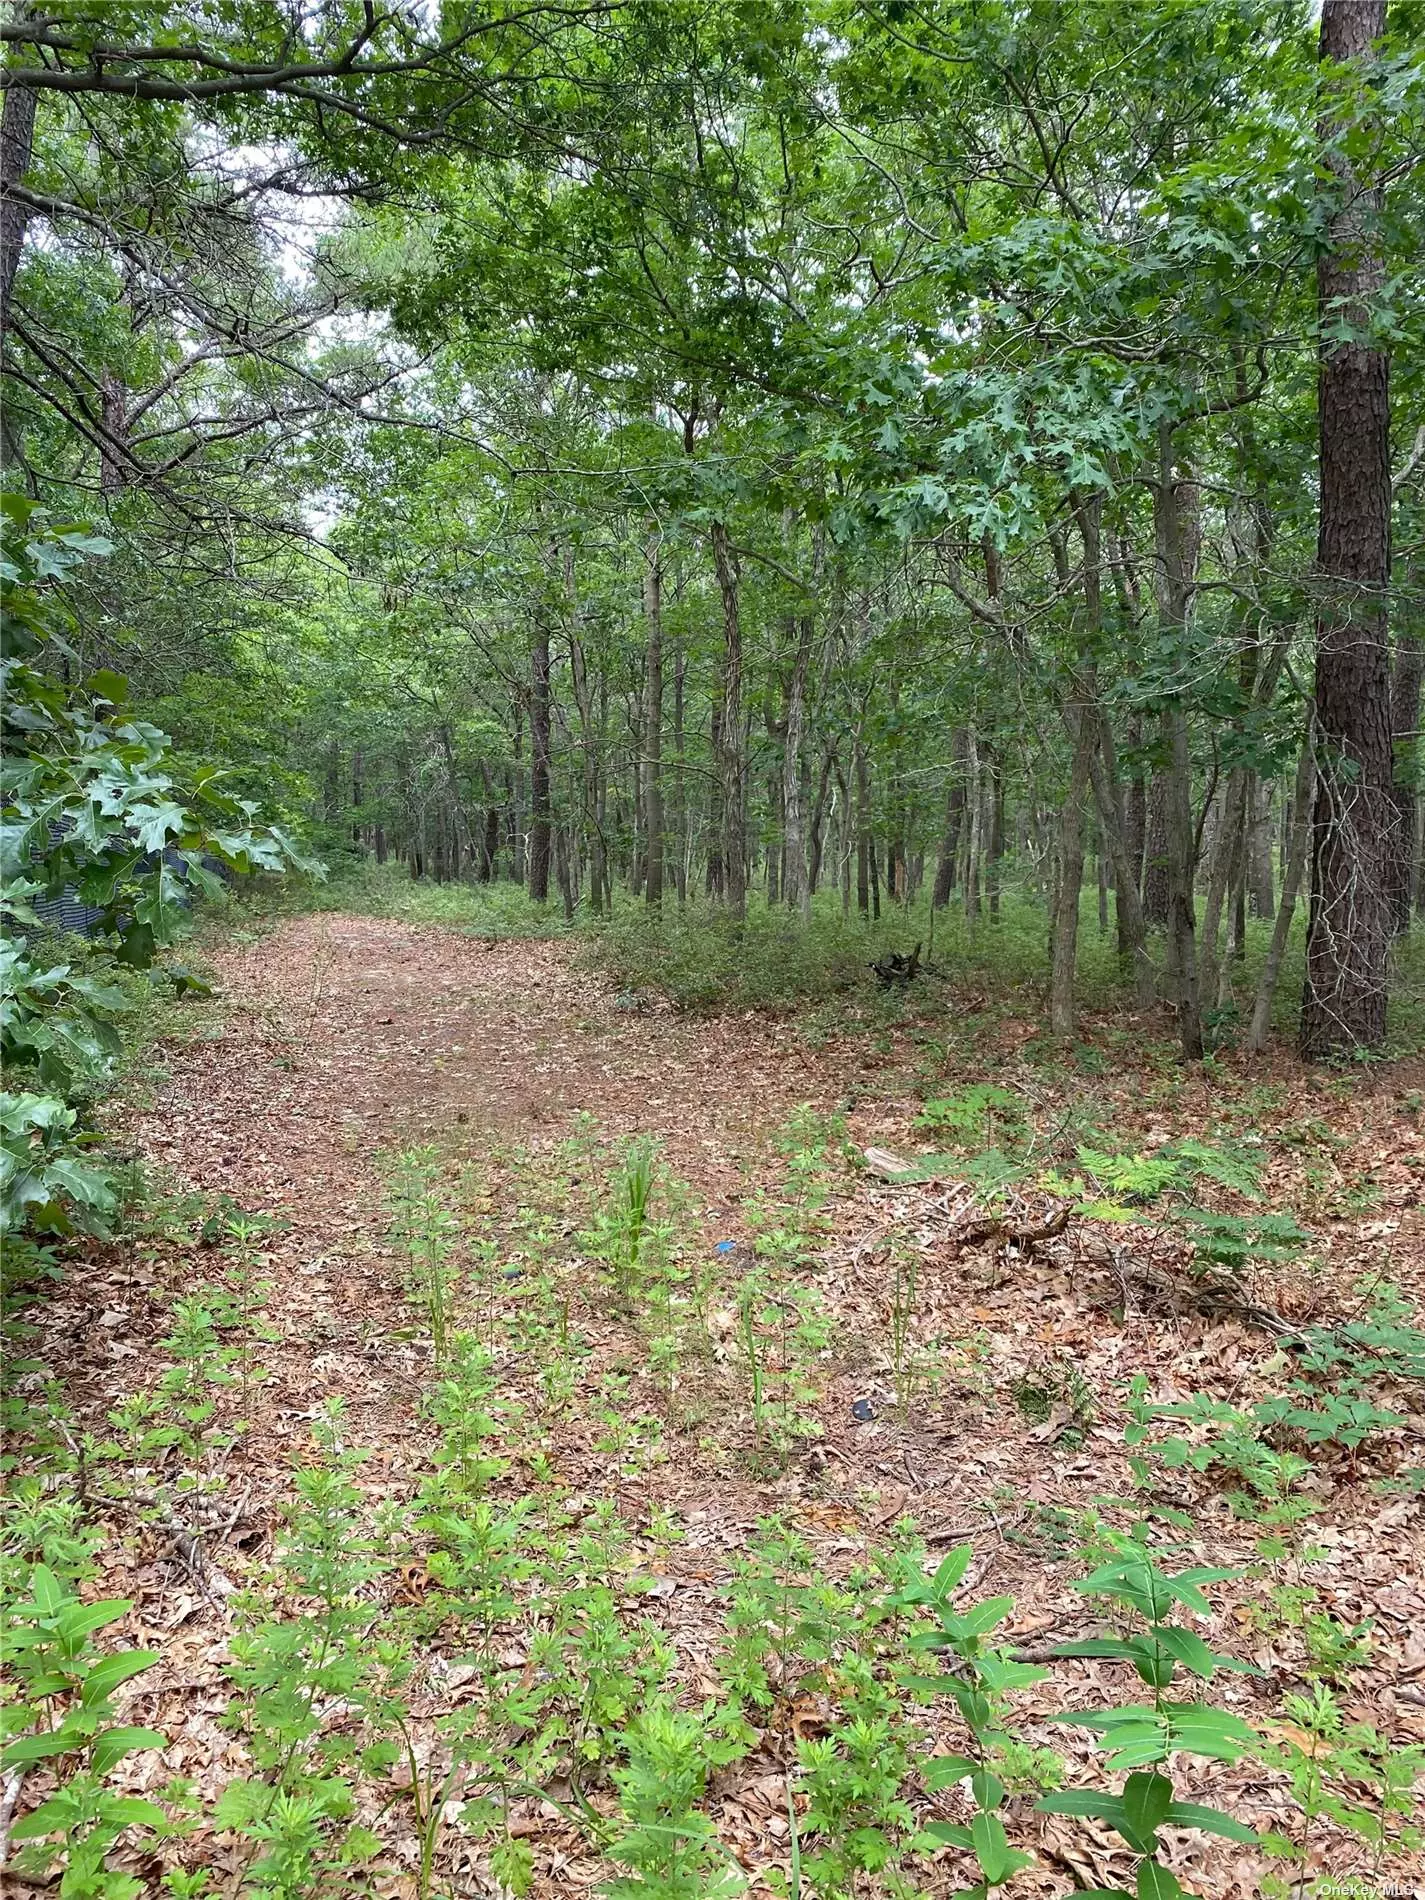 5 Acre lot located down dirt road - wooded and level.